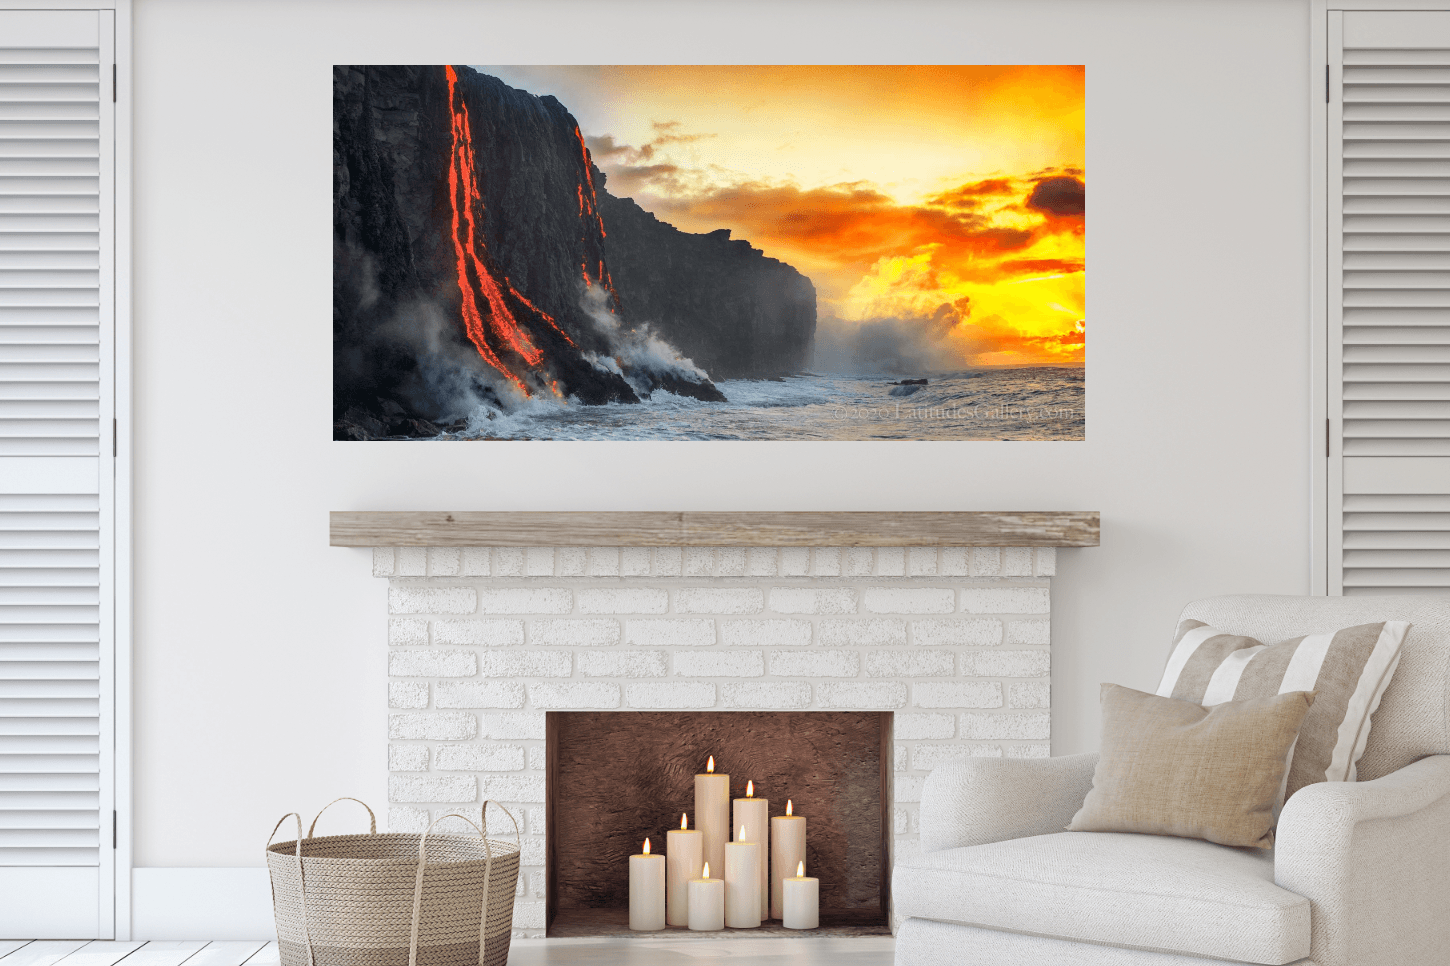 Fine art nature photography of lava cascading down the side of the cliff on the Big Island of Hawaii, while the sunset mimics with its own fiery beauty.